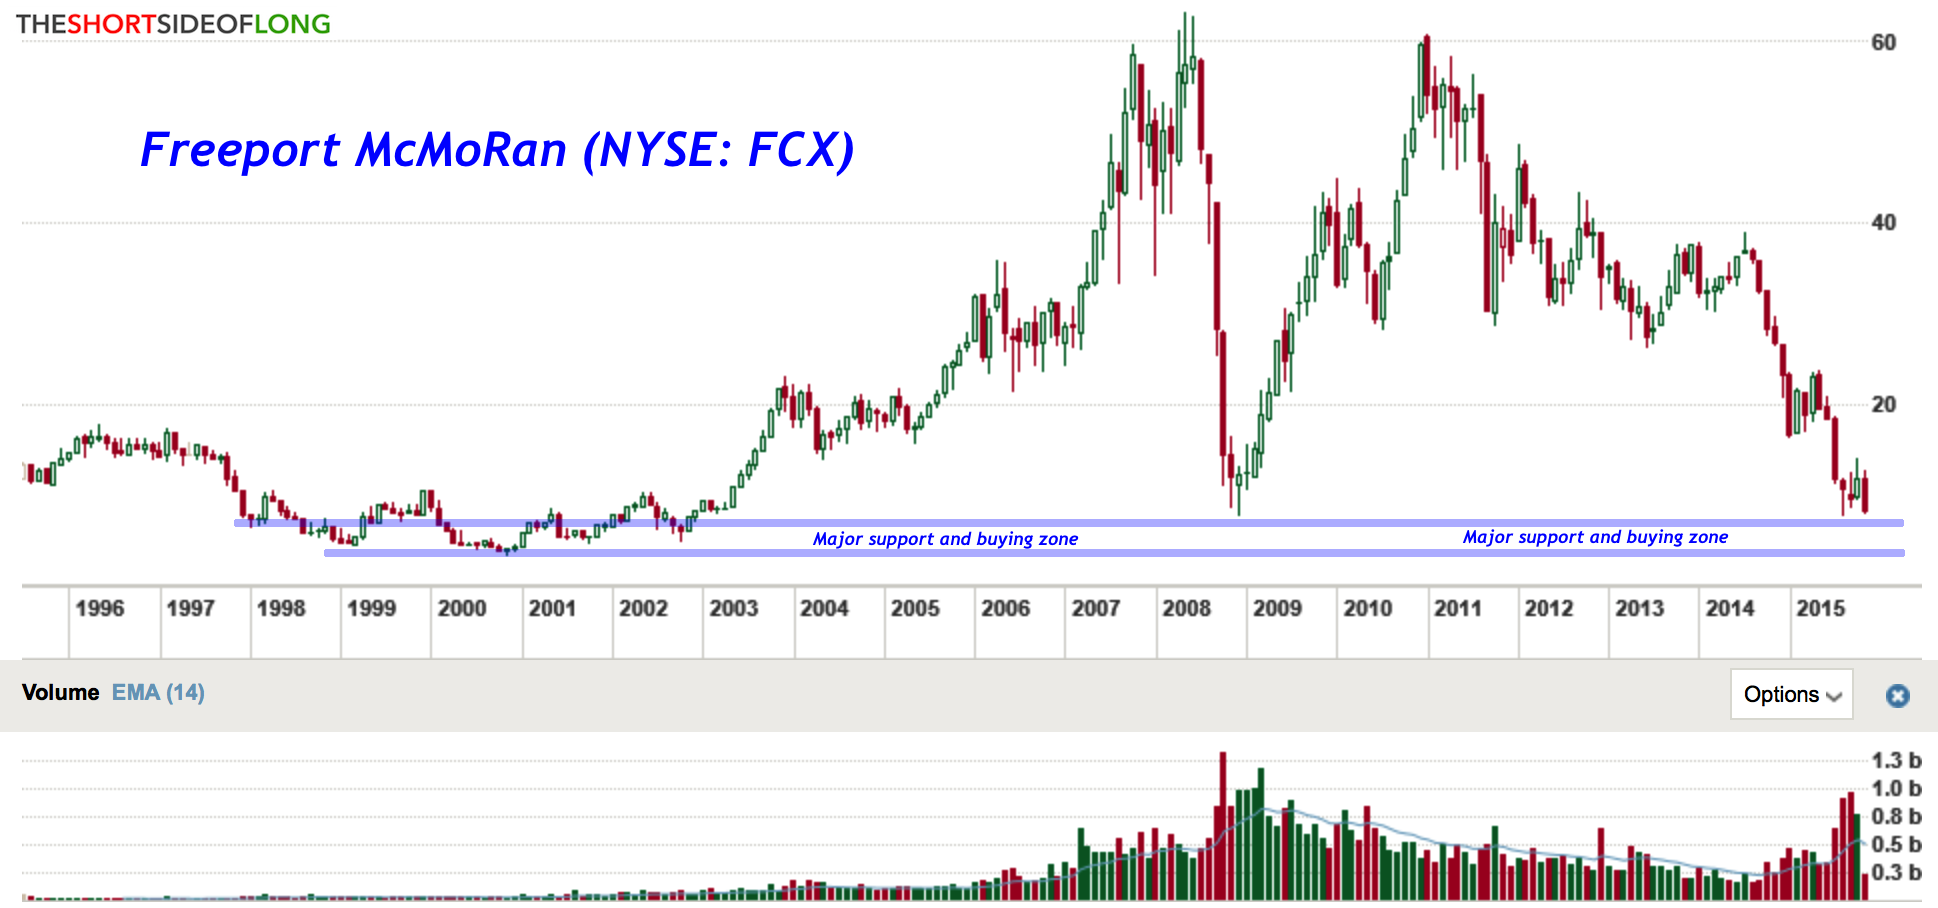 FCX Overview 1996-2015